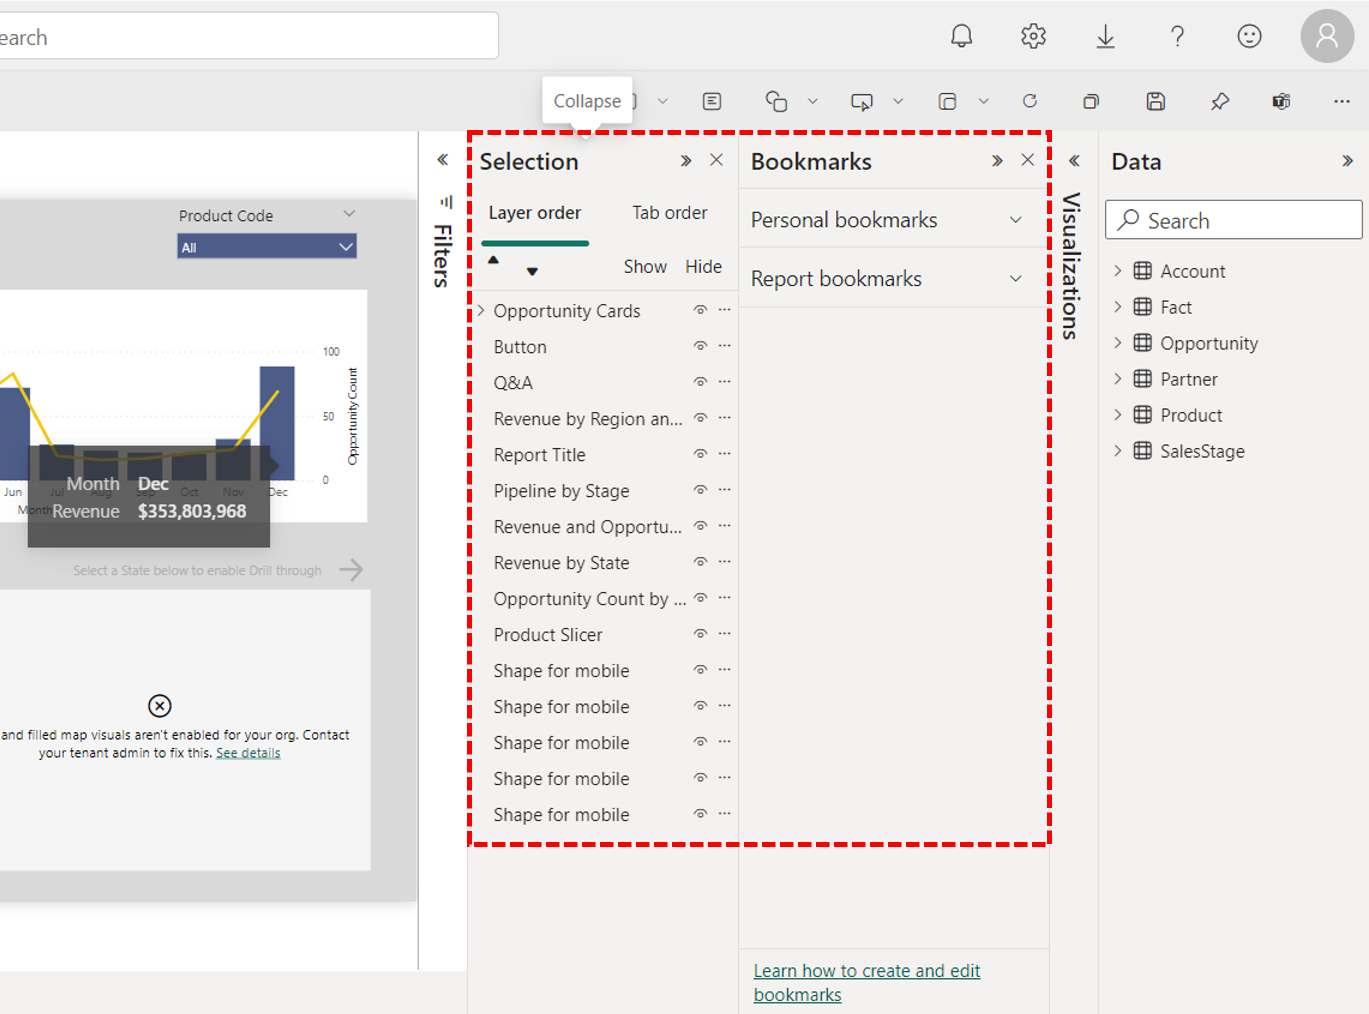 Selection and bookmarks pane in Power BI